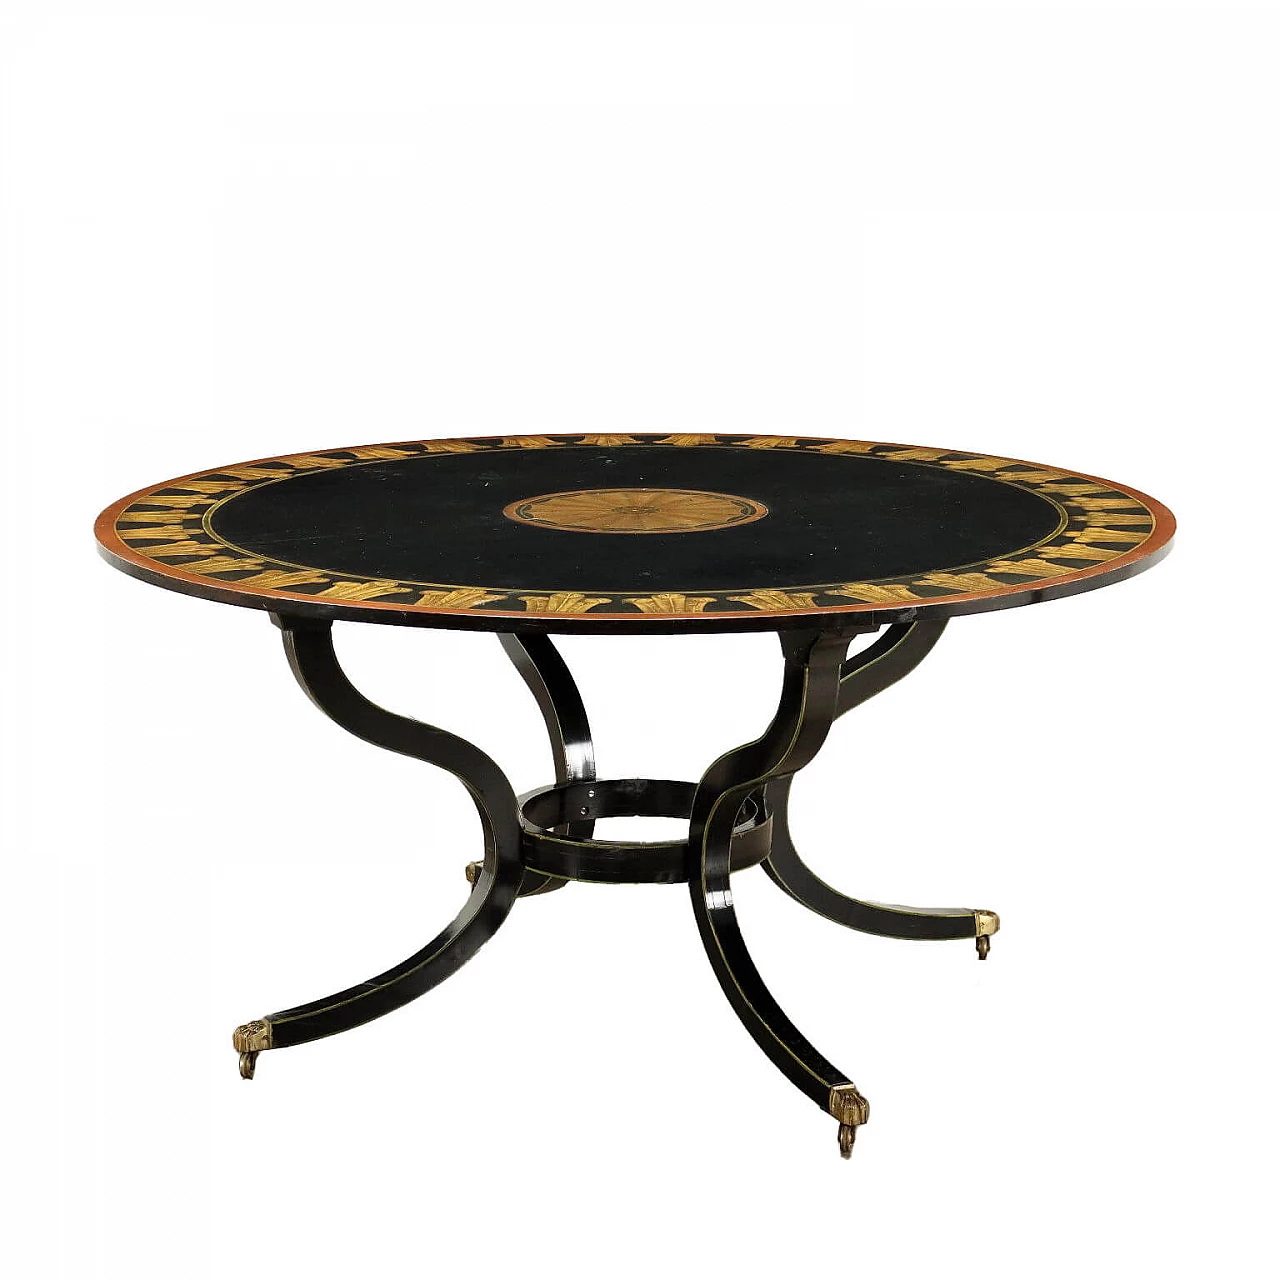 Adam style table supported by bronze feet, 19th century 1